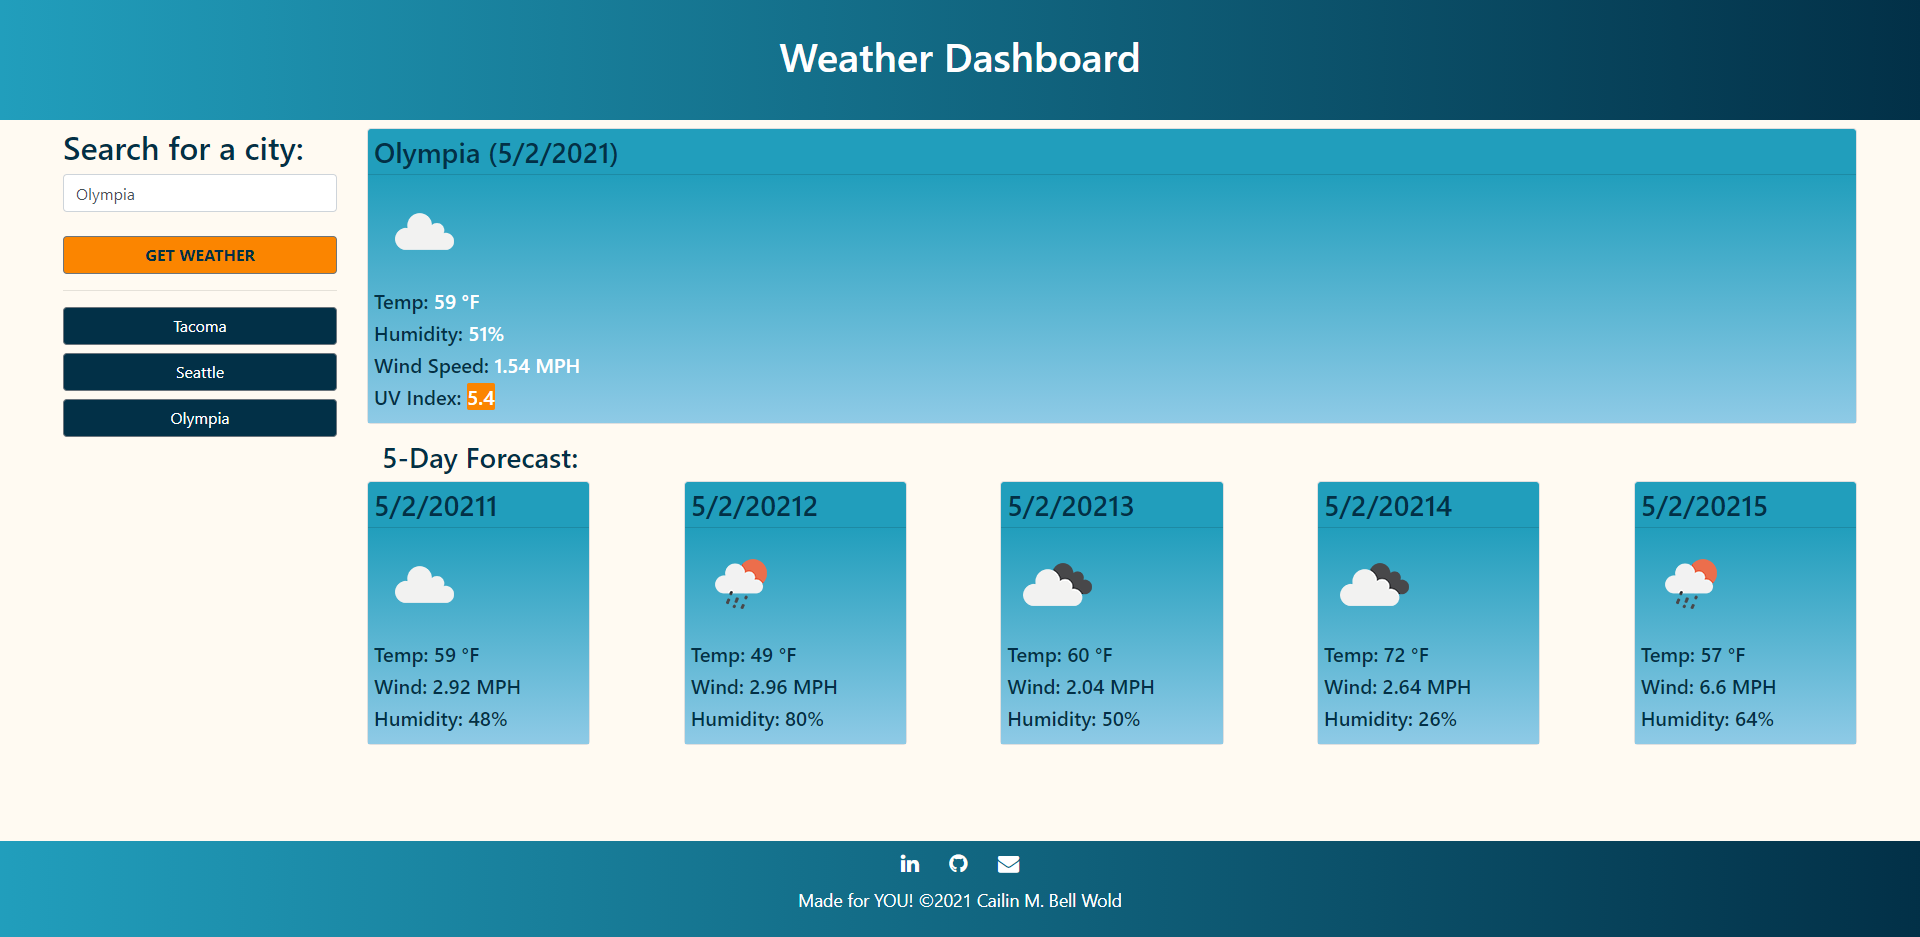 My weather dashboard, including search field, display, and history.